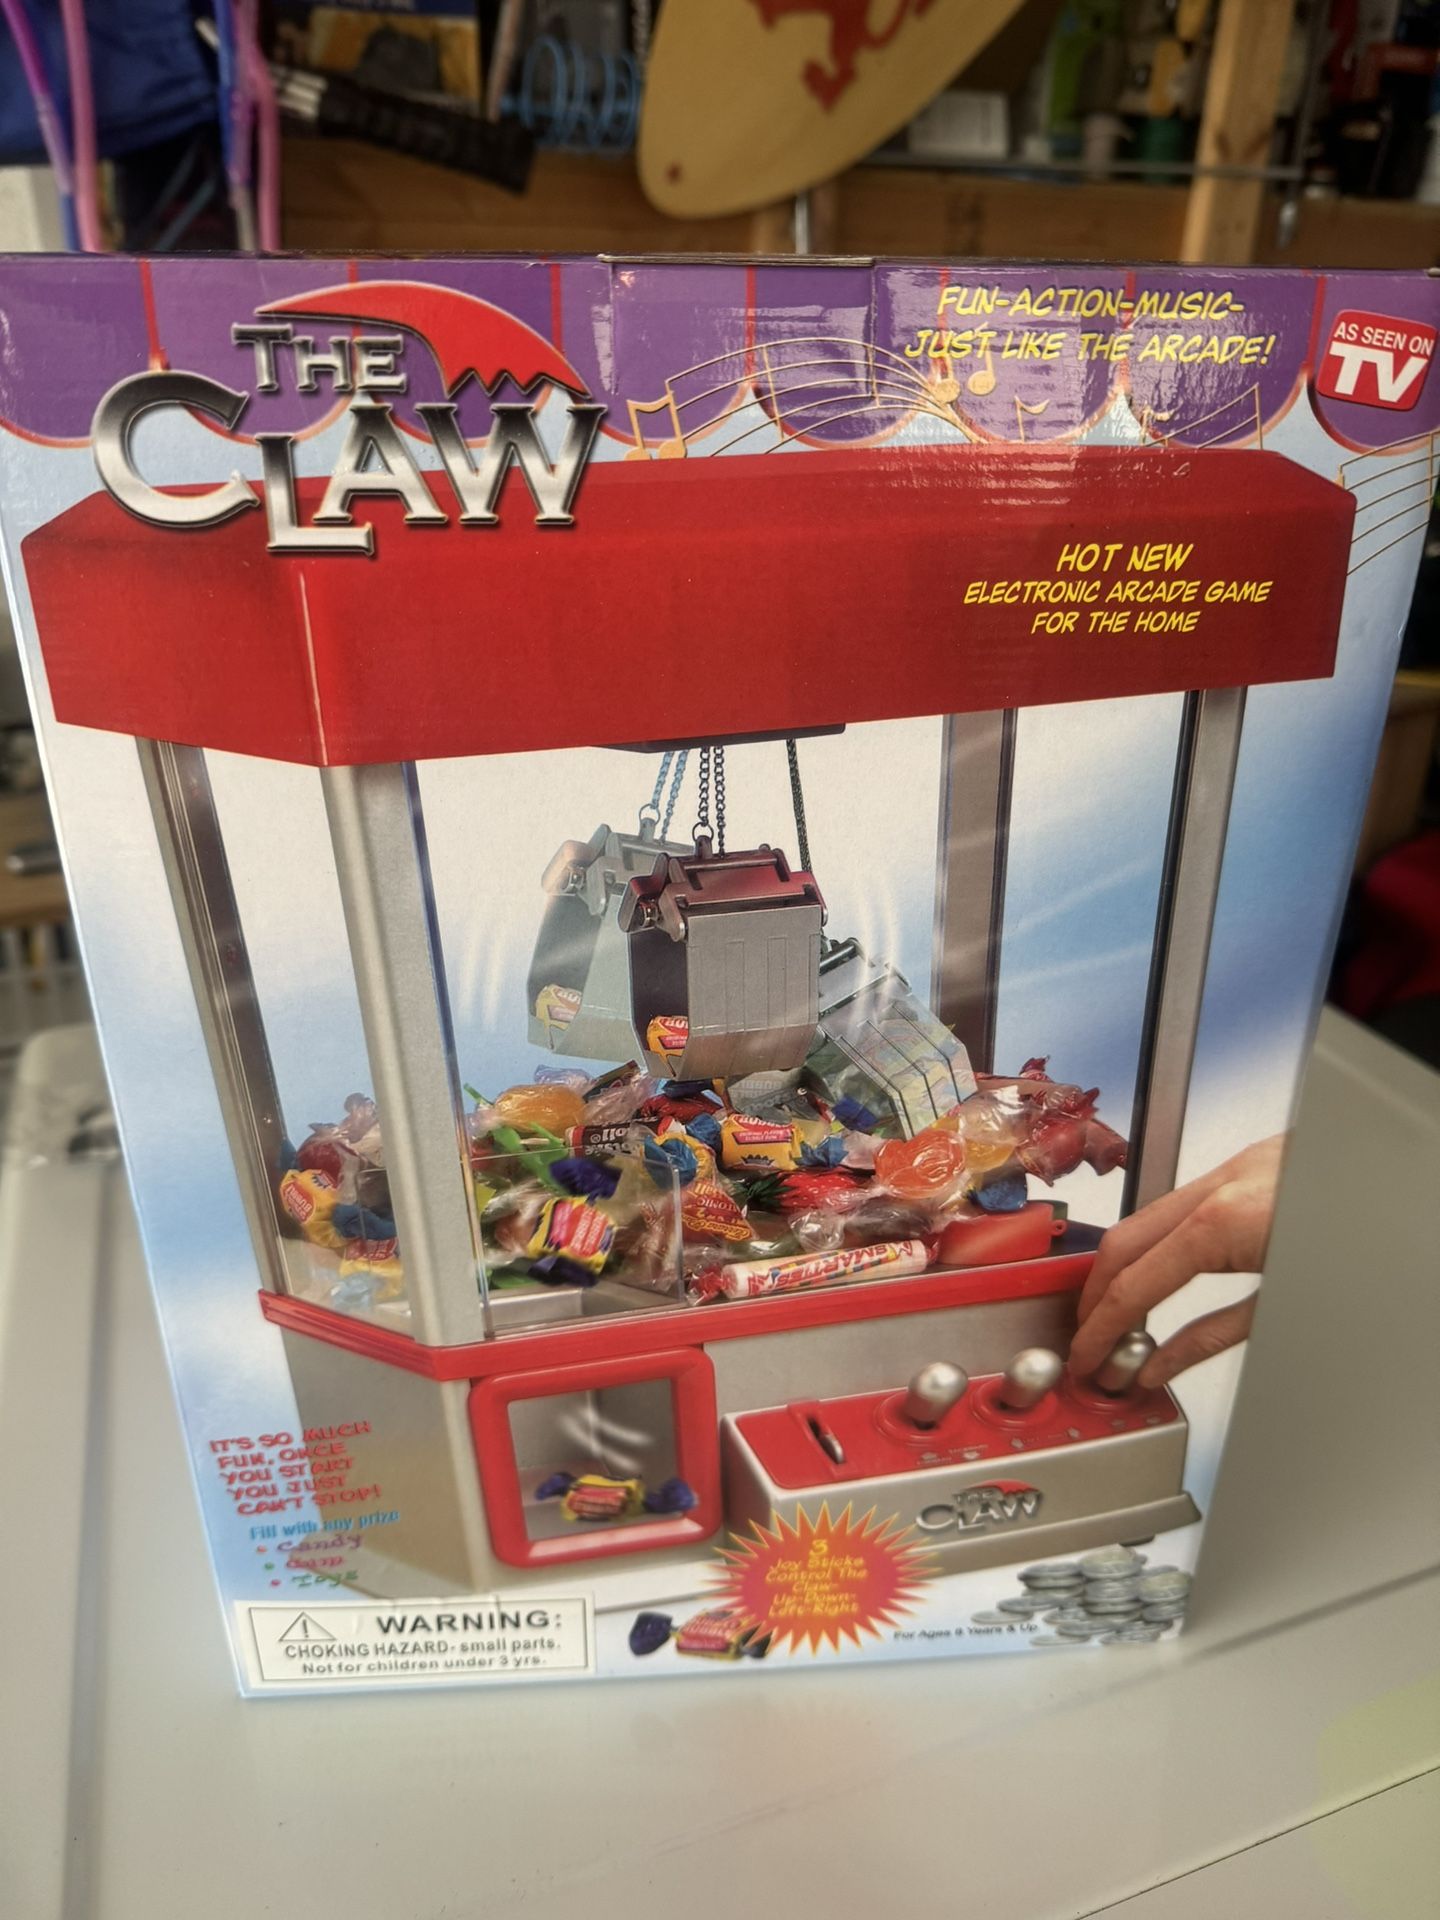 The Claw 